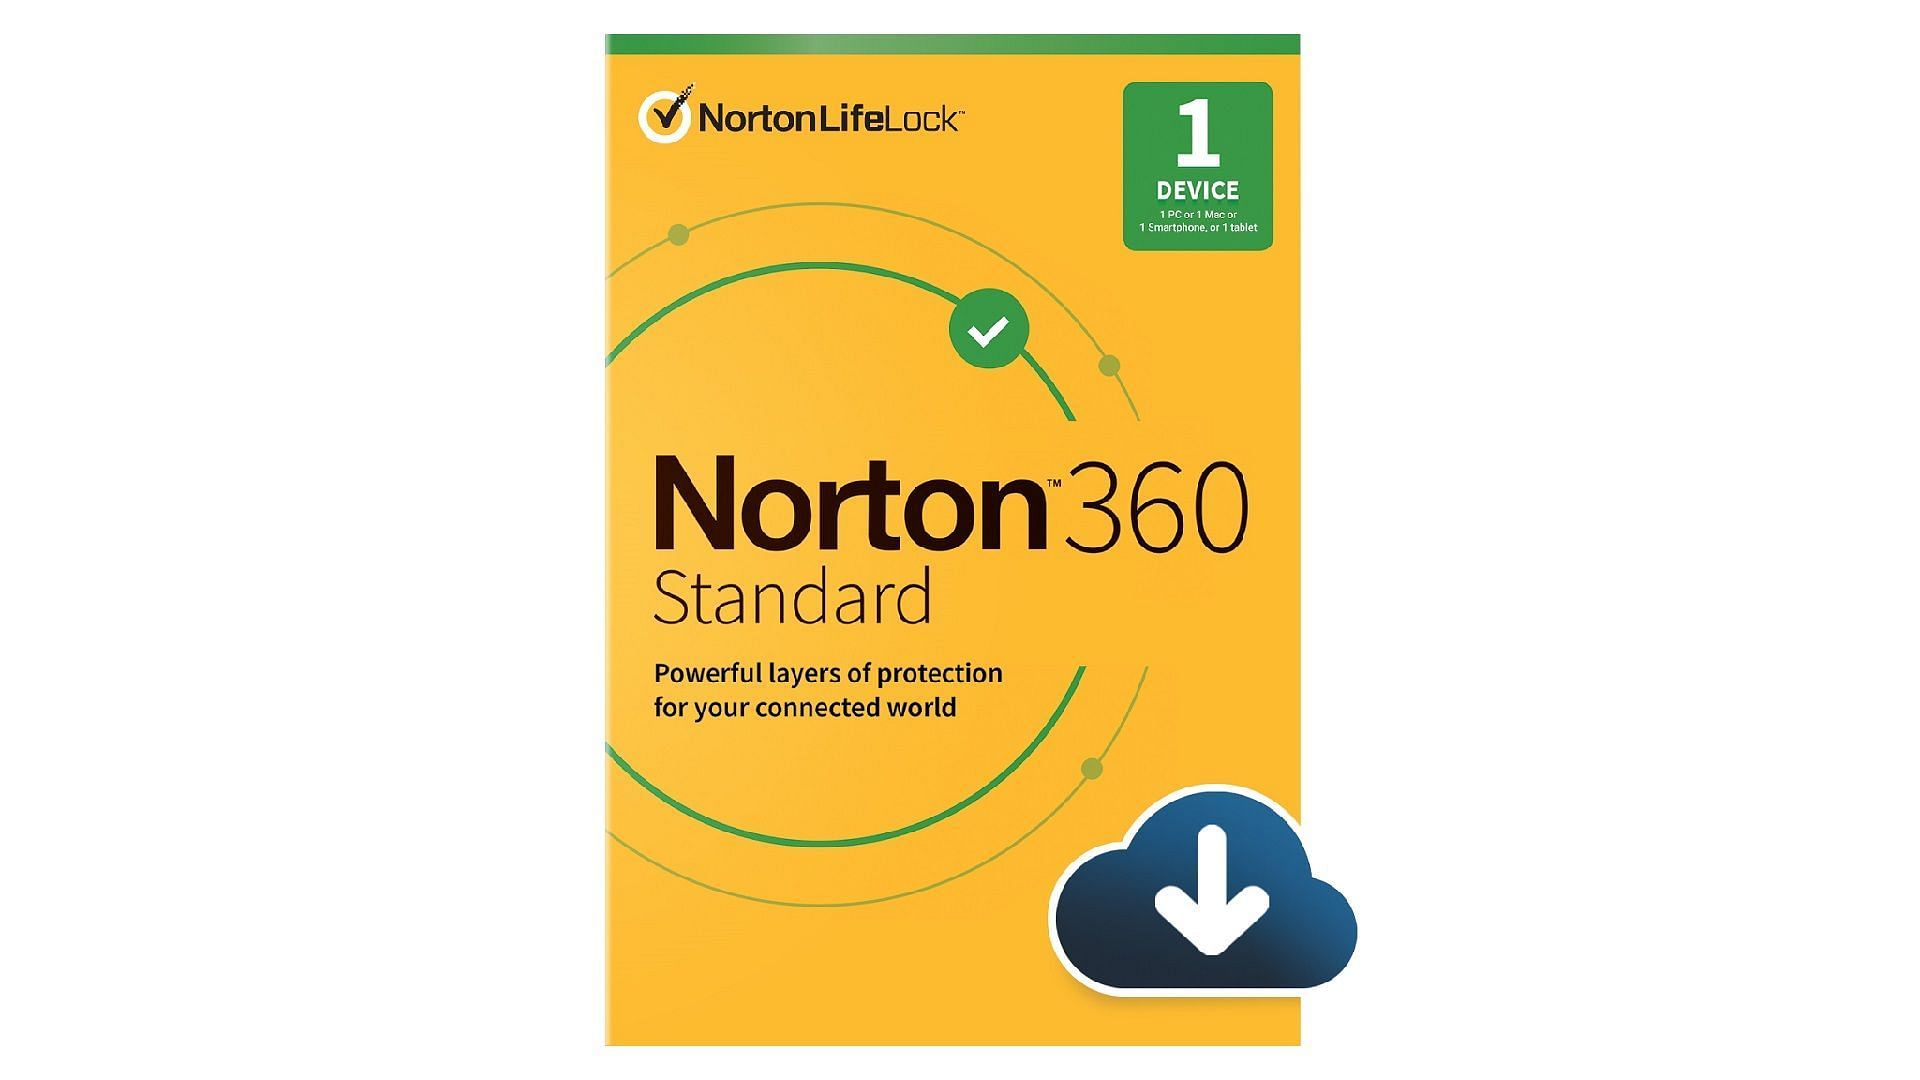  Norton 360 Standard is one of the best antivirus software out there (Image via Norton)